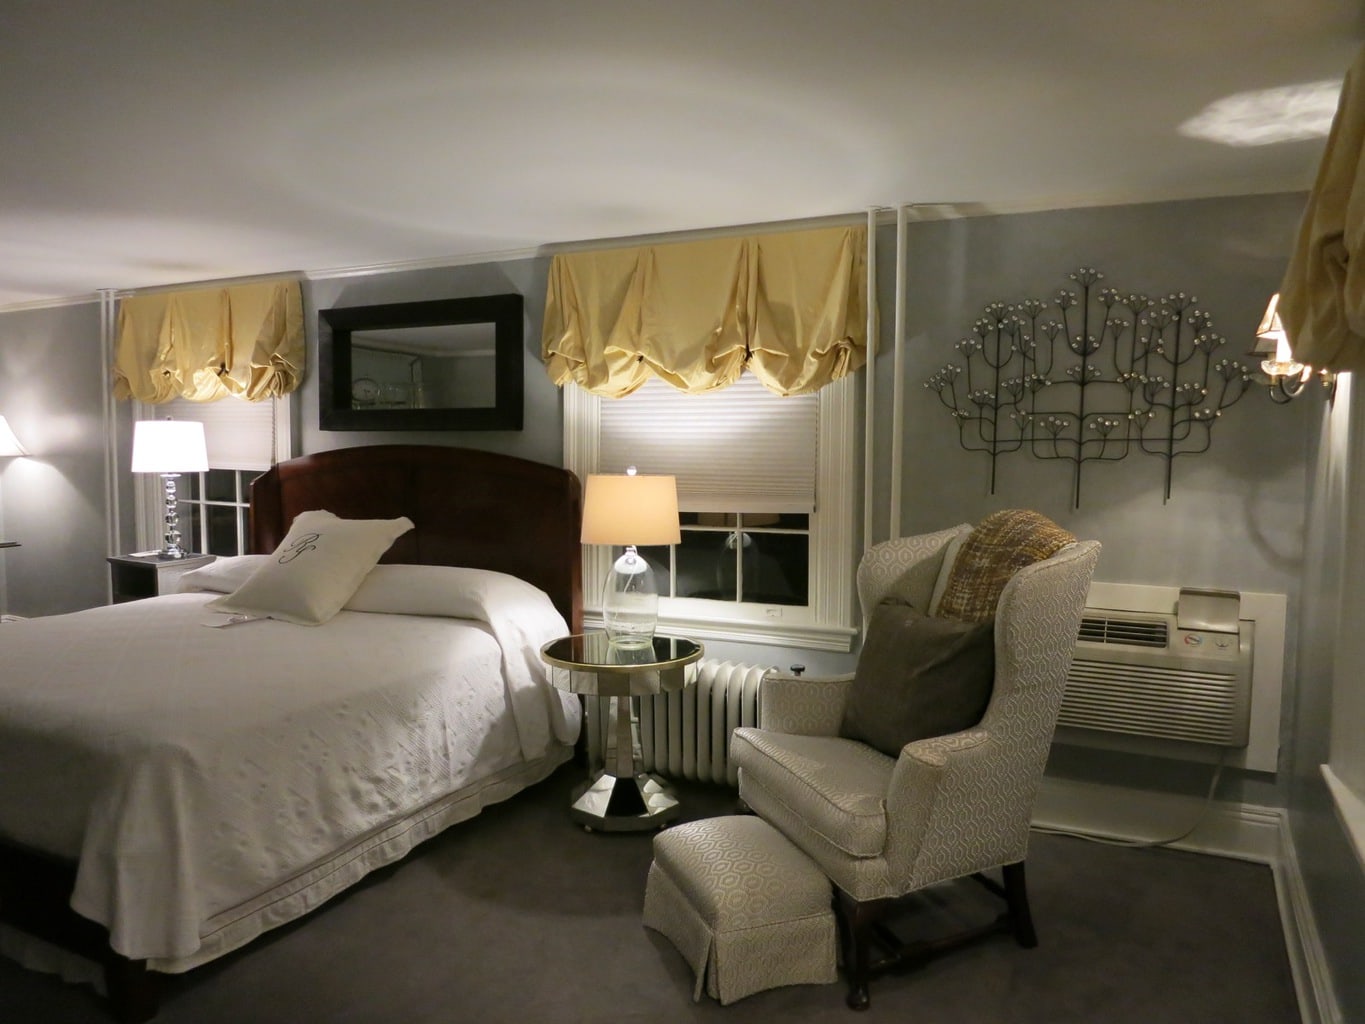 Guest Room, Roger Sherman Inn, New Canaan CT